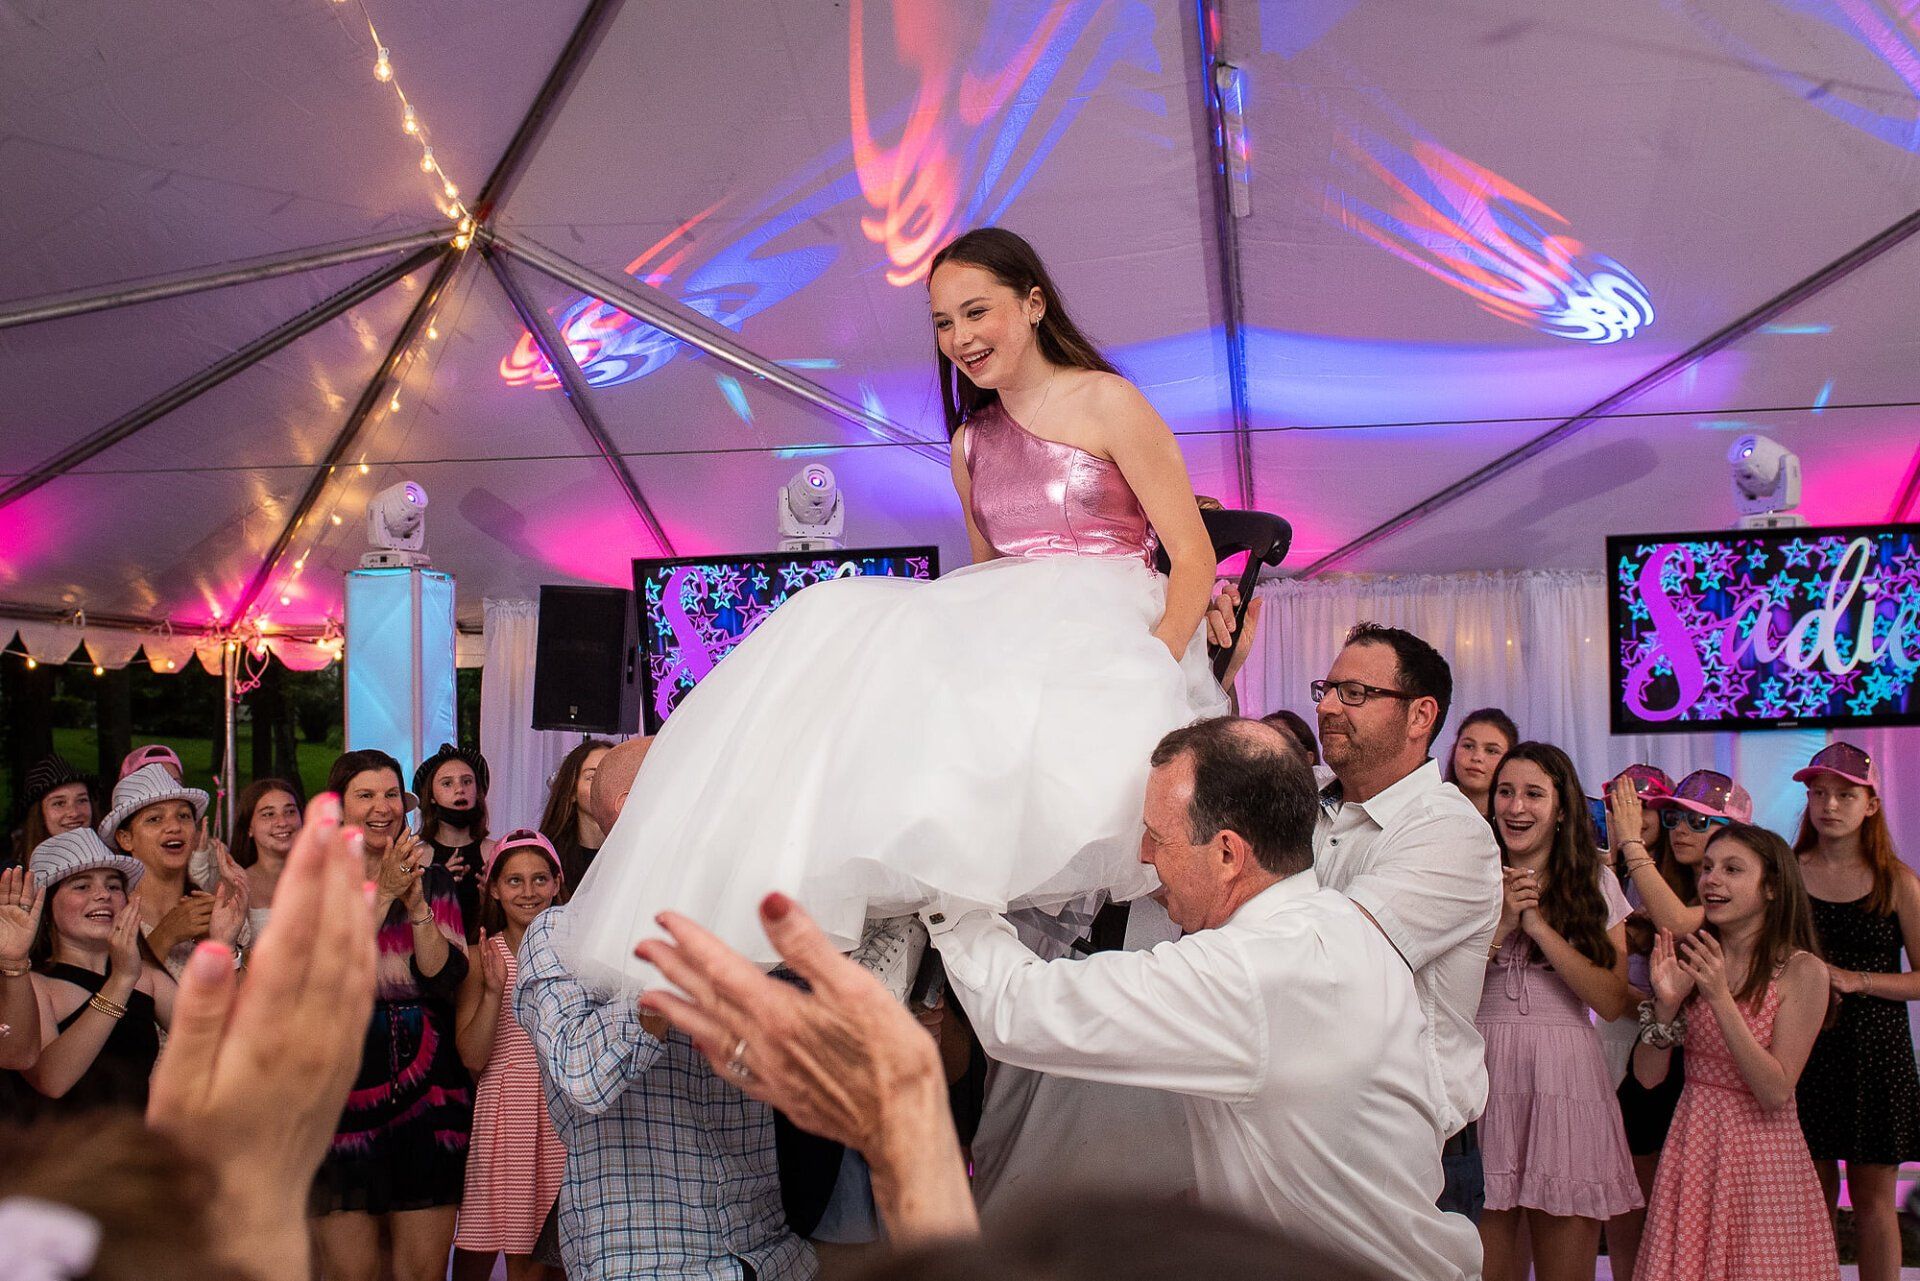 Bat Mitzvah outdoor party with guests surrounding a chair lift ceremony.